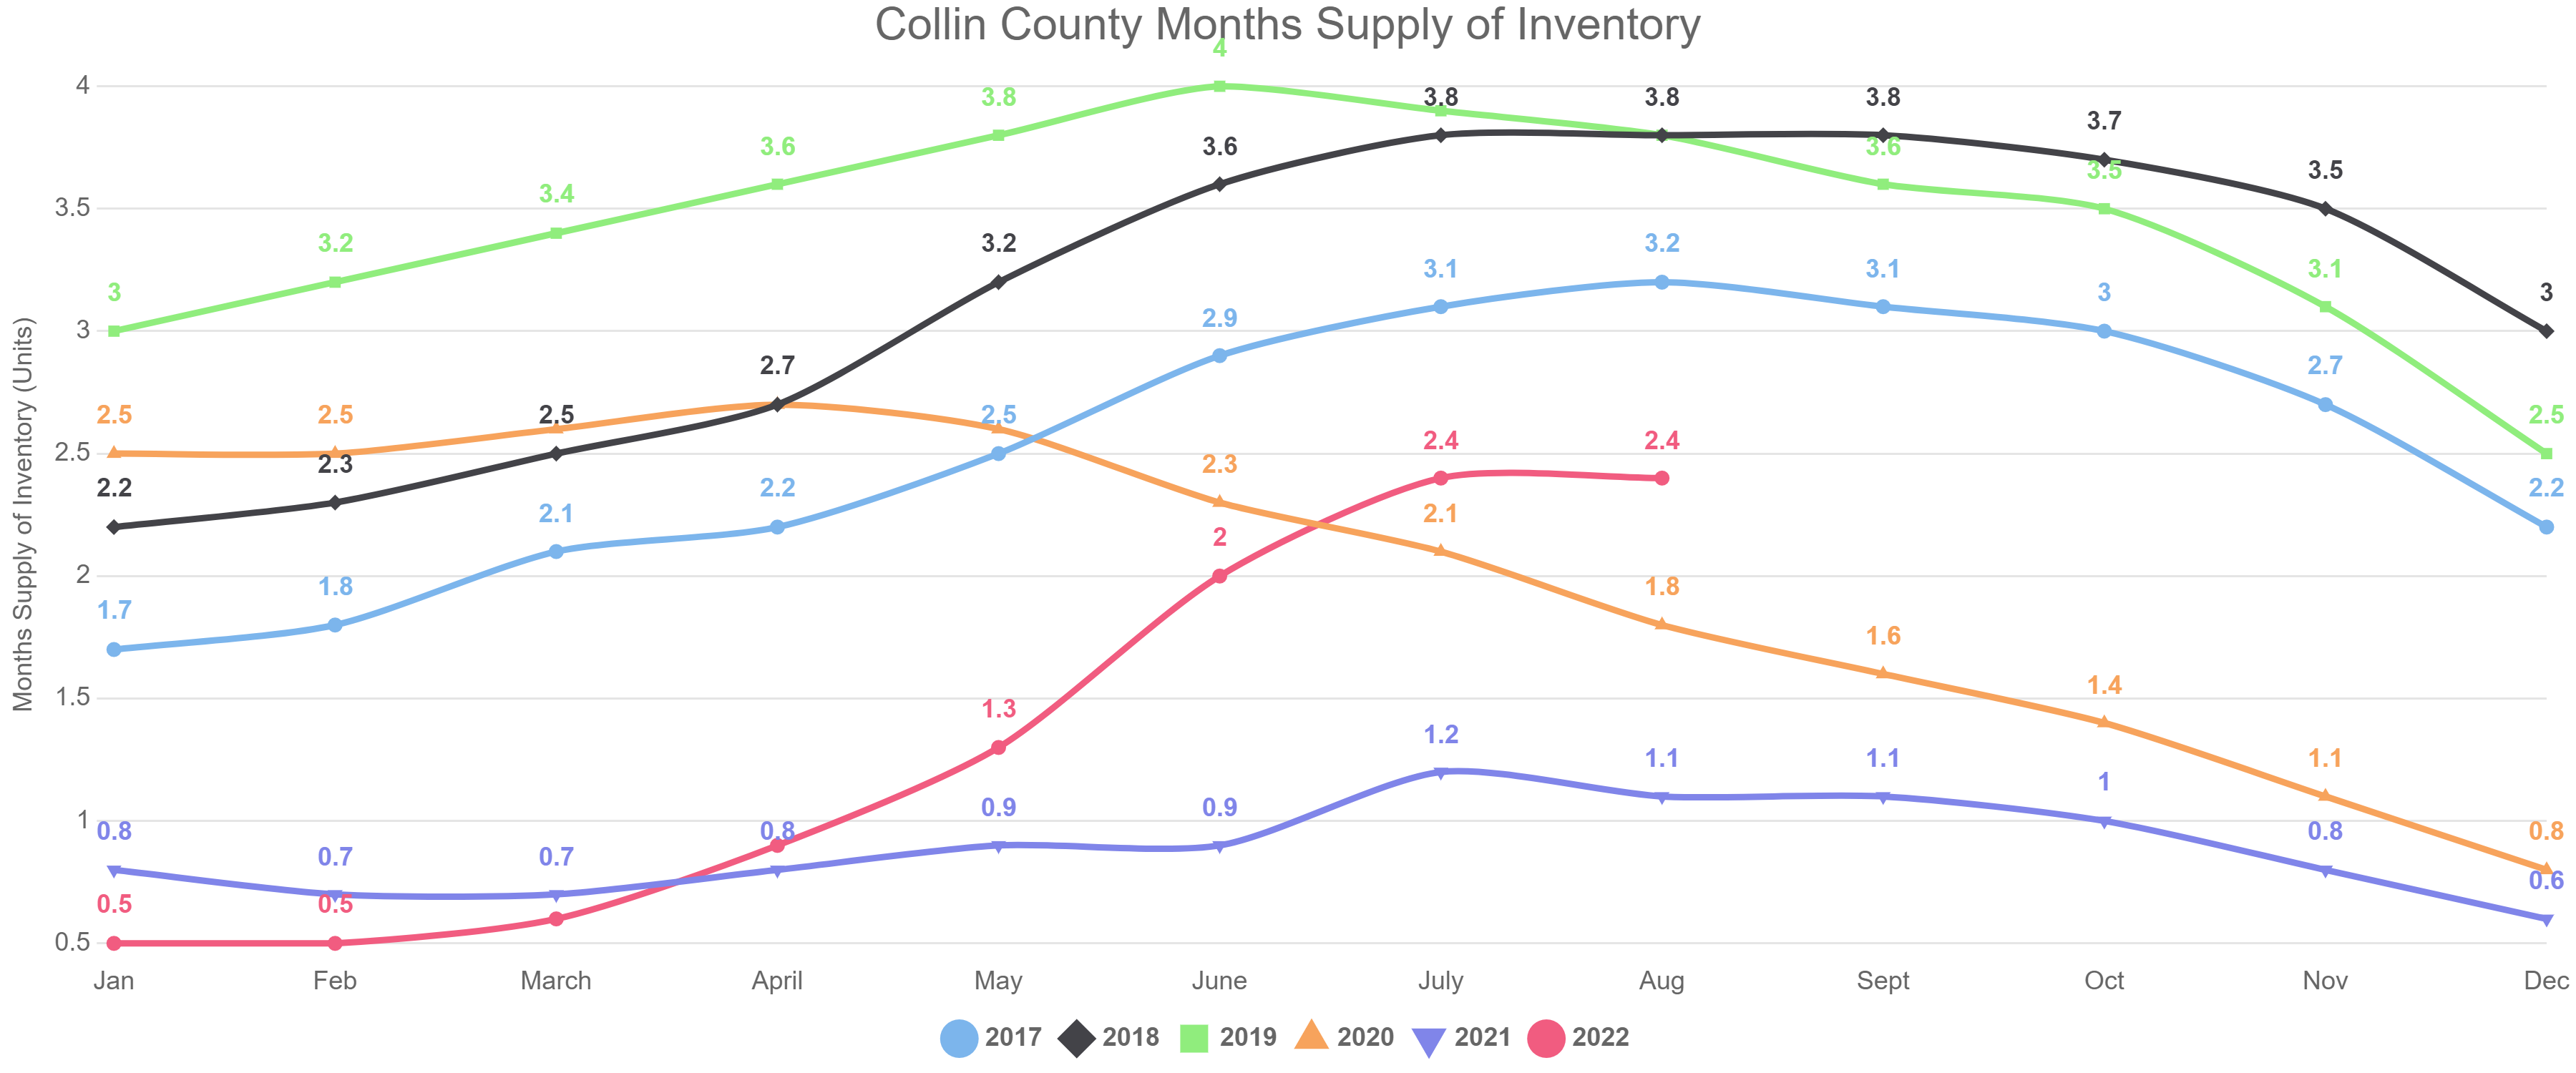 Collin County Months Supply of Inventory